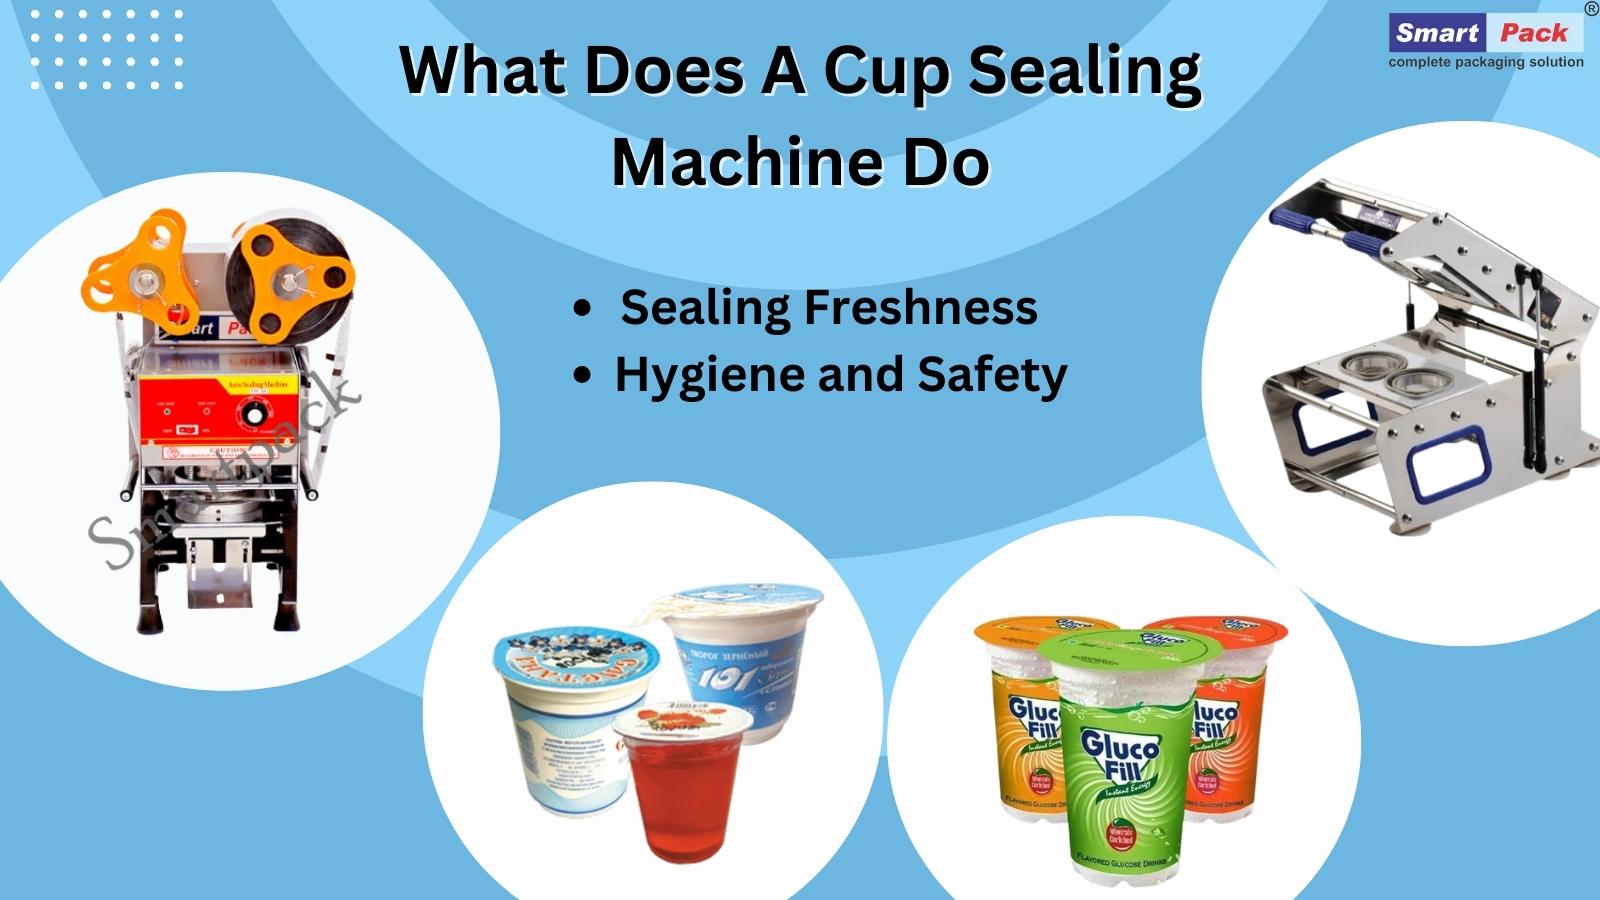 What does a cup sealing machine do